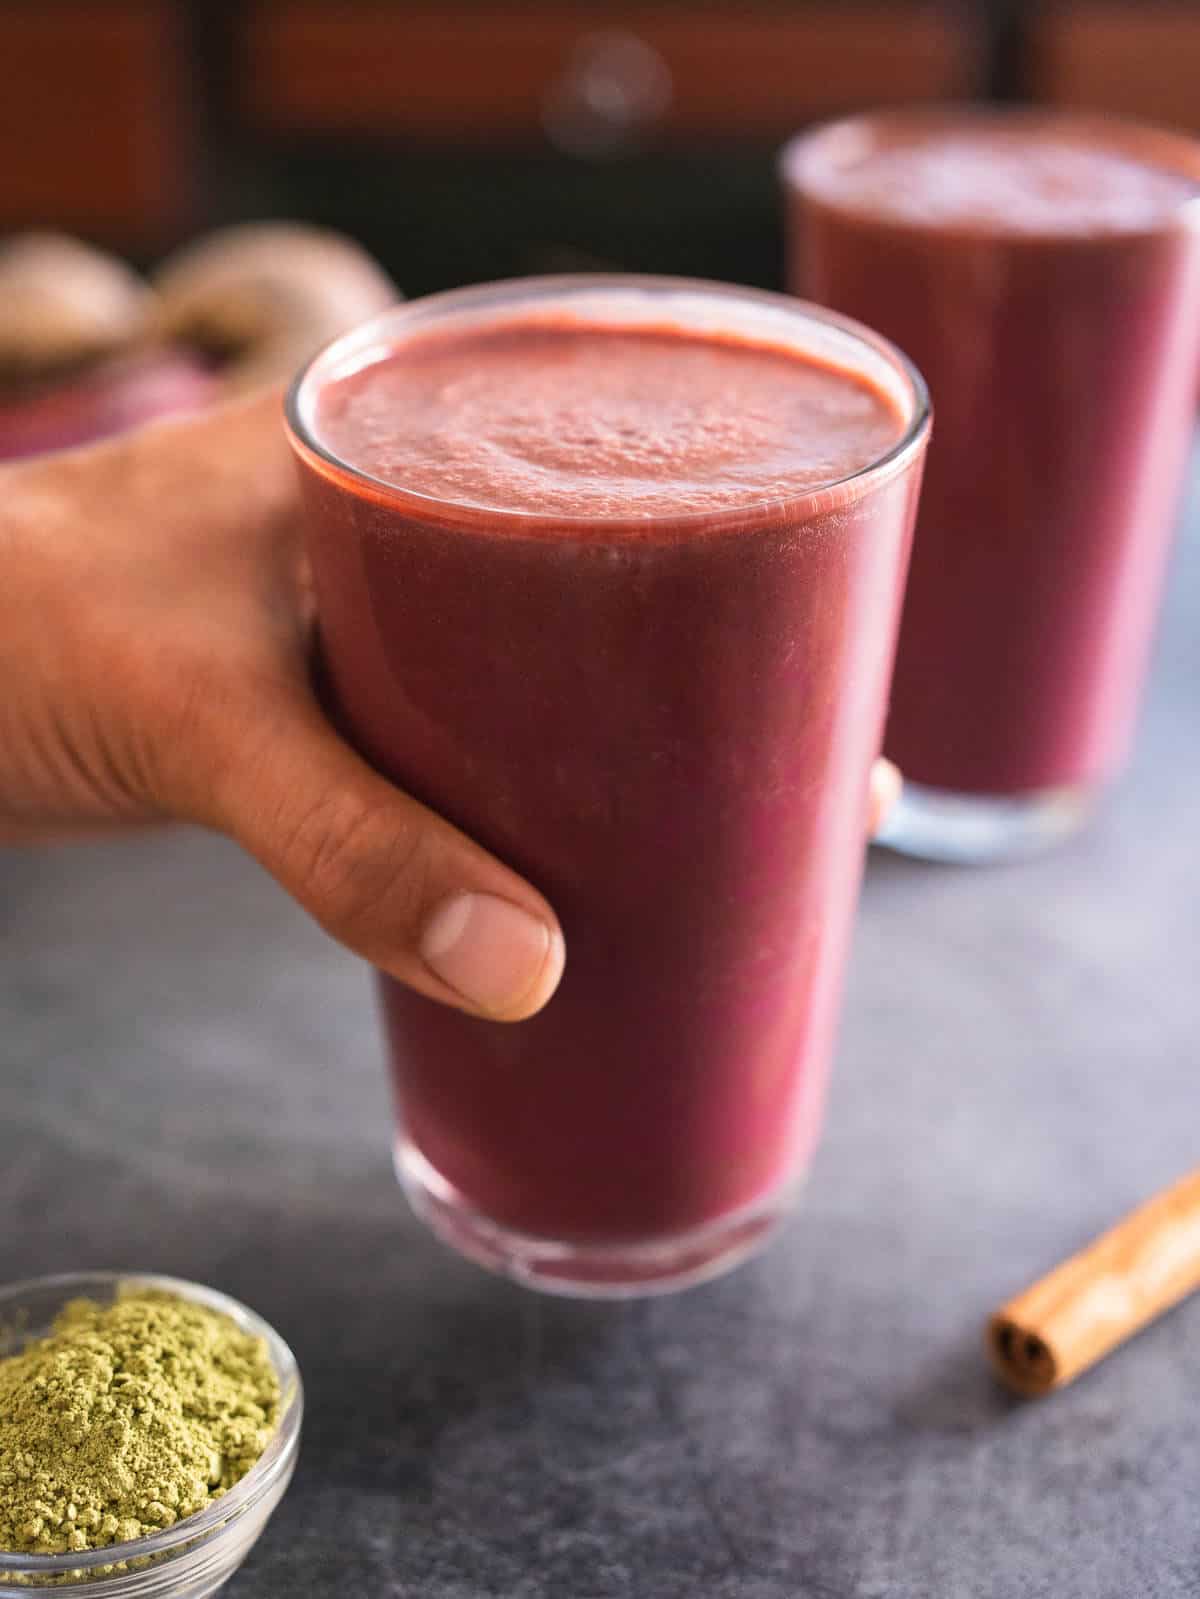 serve and enjoy smoothie chilled.